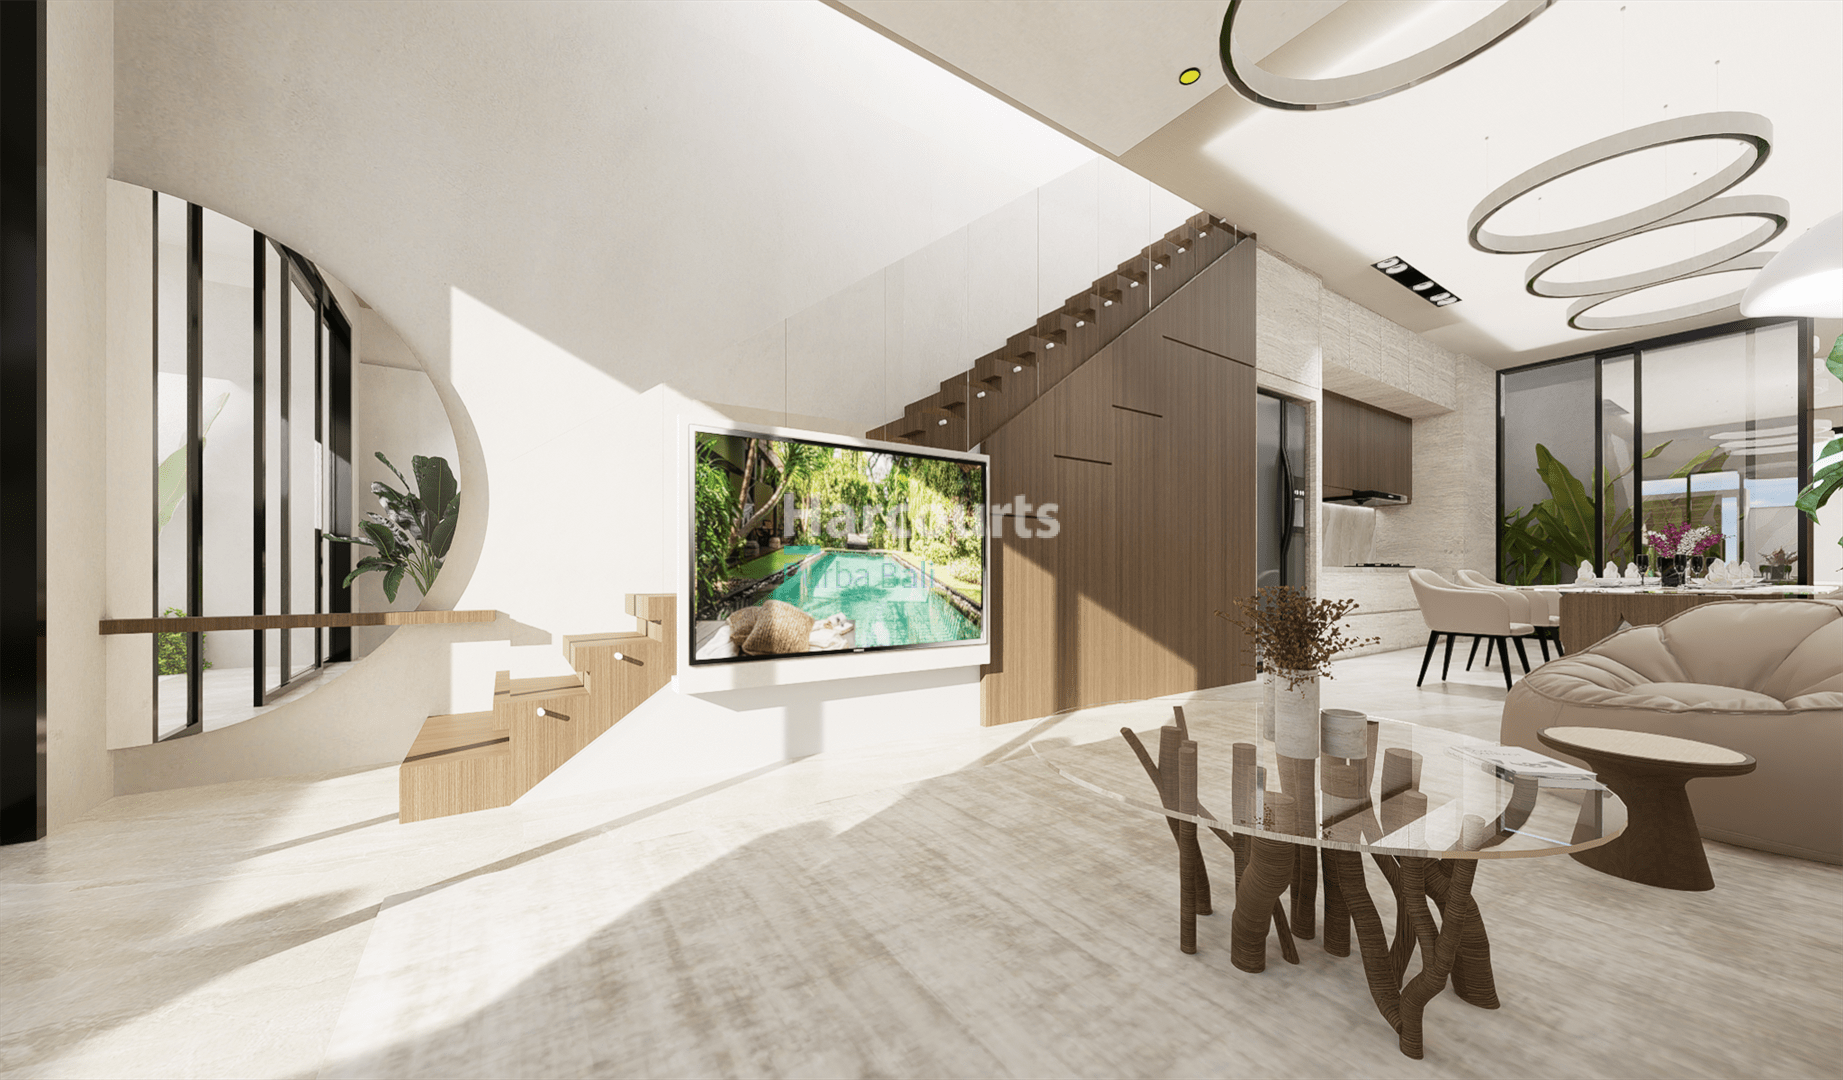 Off-Plan 2 Bed Luxury Townhouse in The Heart of Umalas, Bali